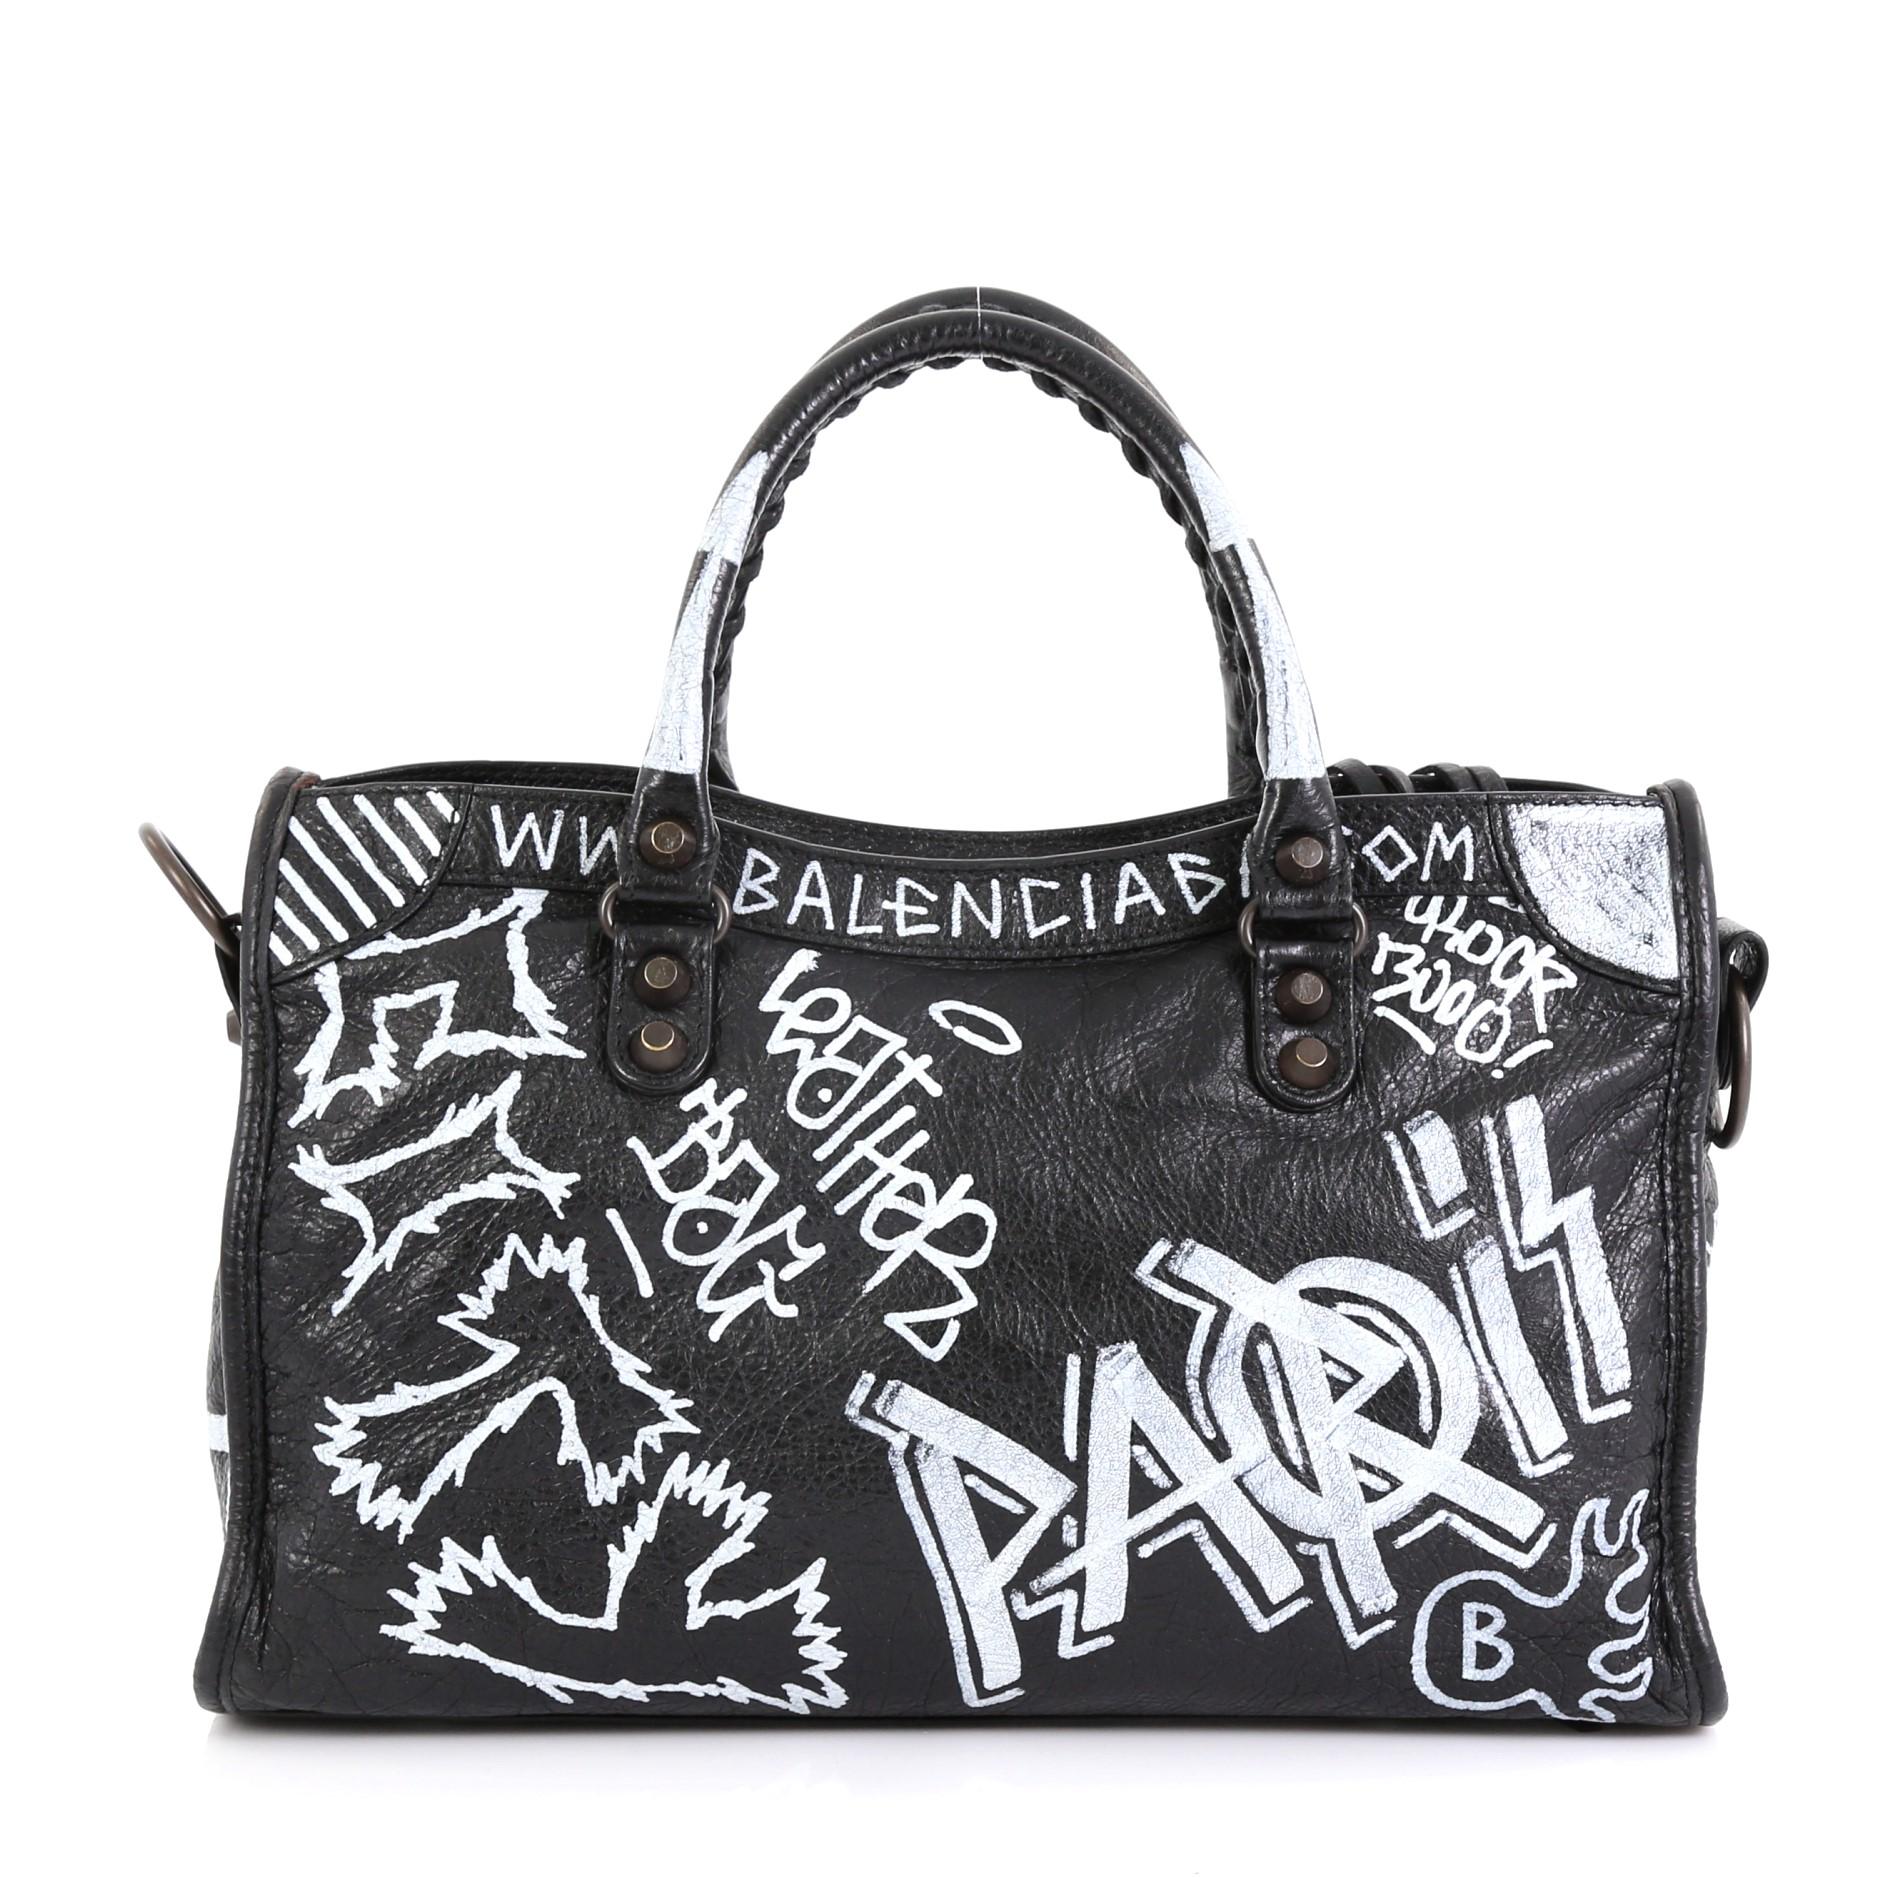 black bag with white writing